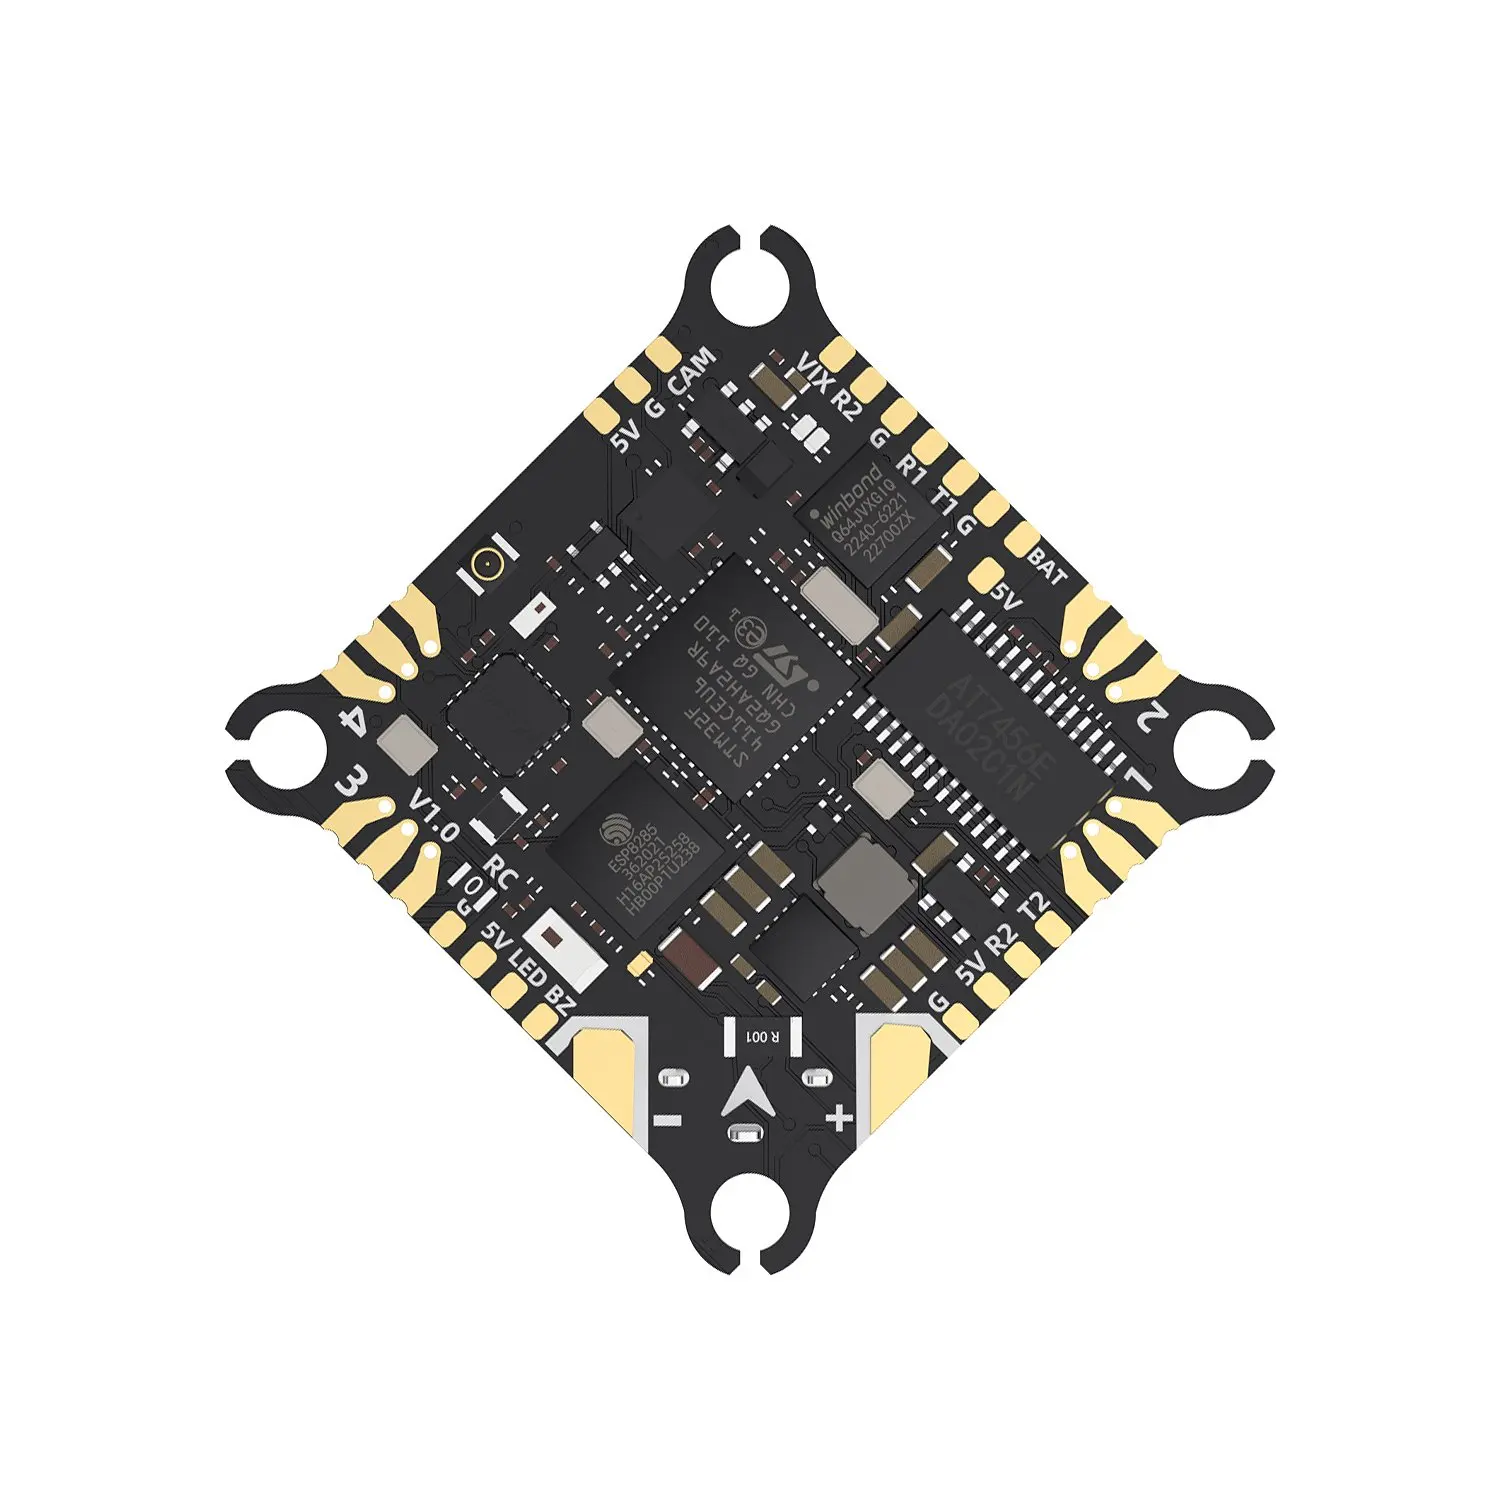 

GEPRC GEP-TAKER F411-12A-E 1~2S AIO STM32F411 BMI270 ELRS2.4G Receiver 1-2S 4.2g For DIY RC FPV Quadcopter Freestyle Drone Parts